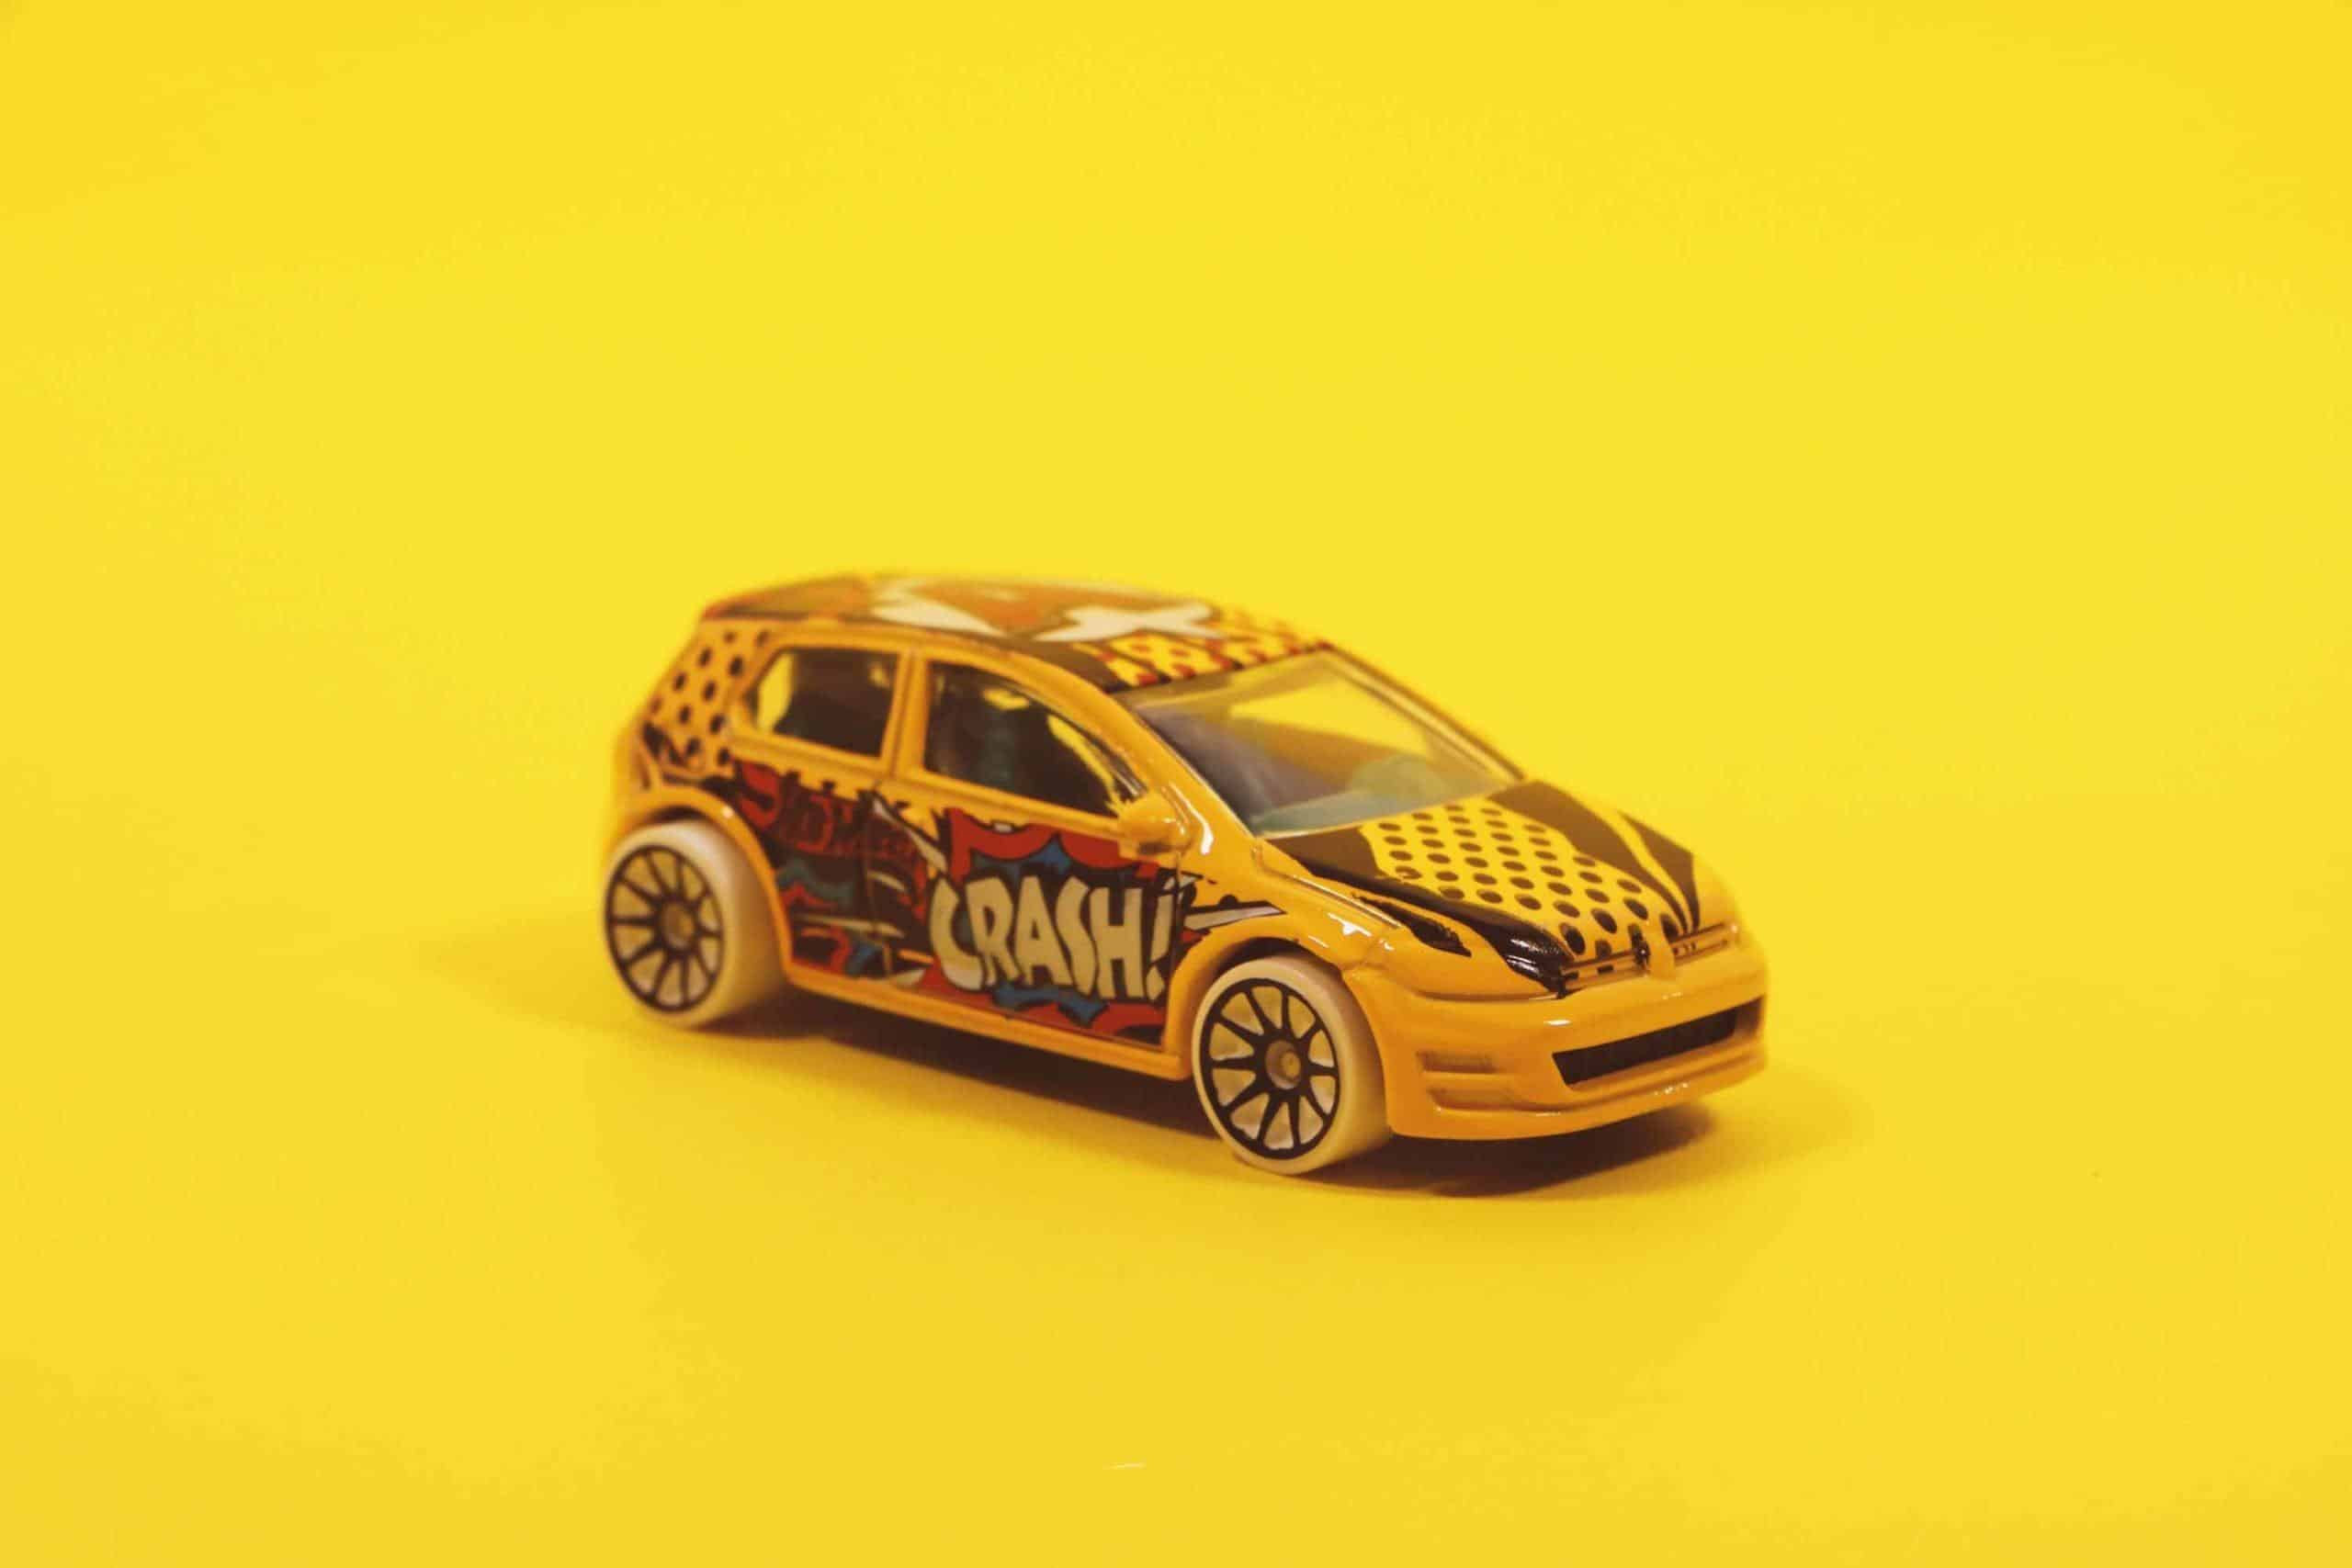 child's toy car on yellow background